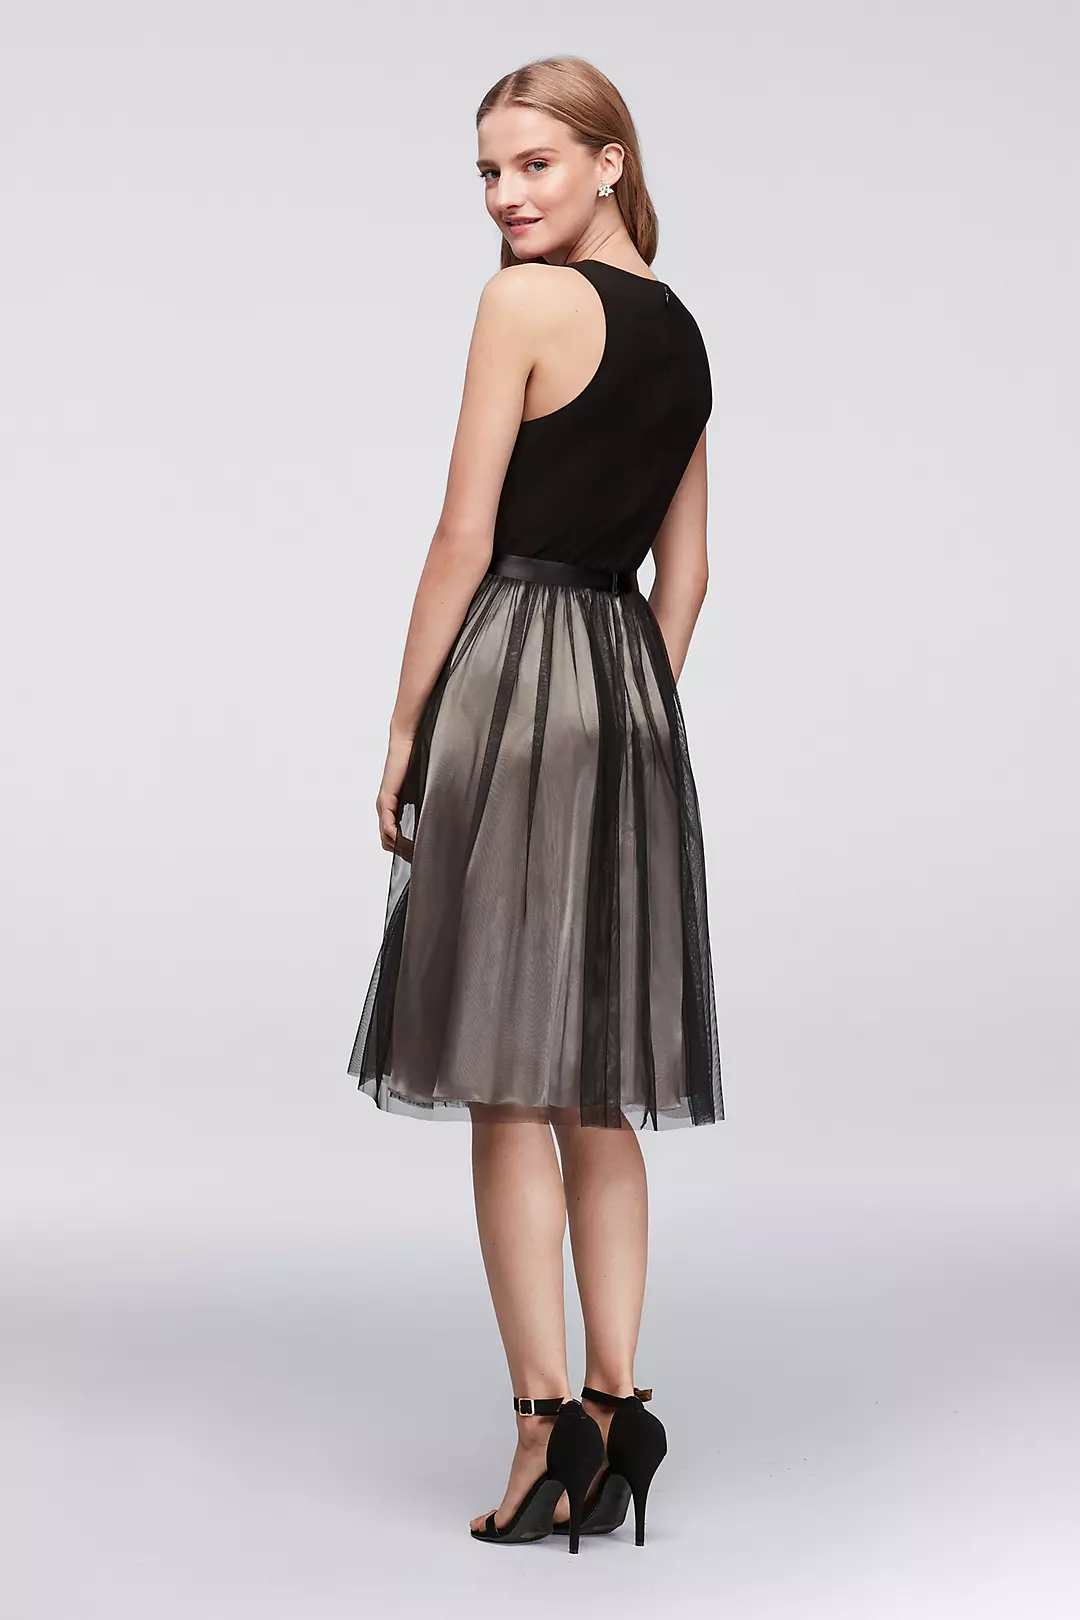 Jeweled Jersey Dress with Sheer Mesh Skirt Image 2